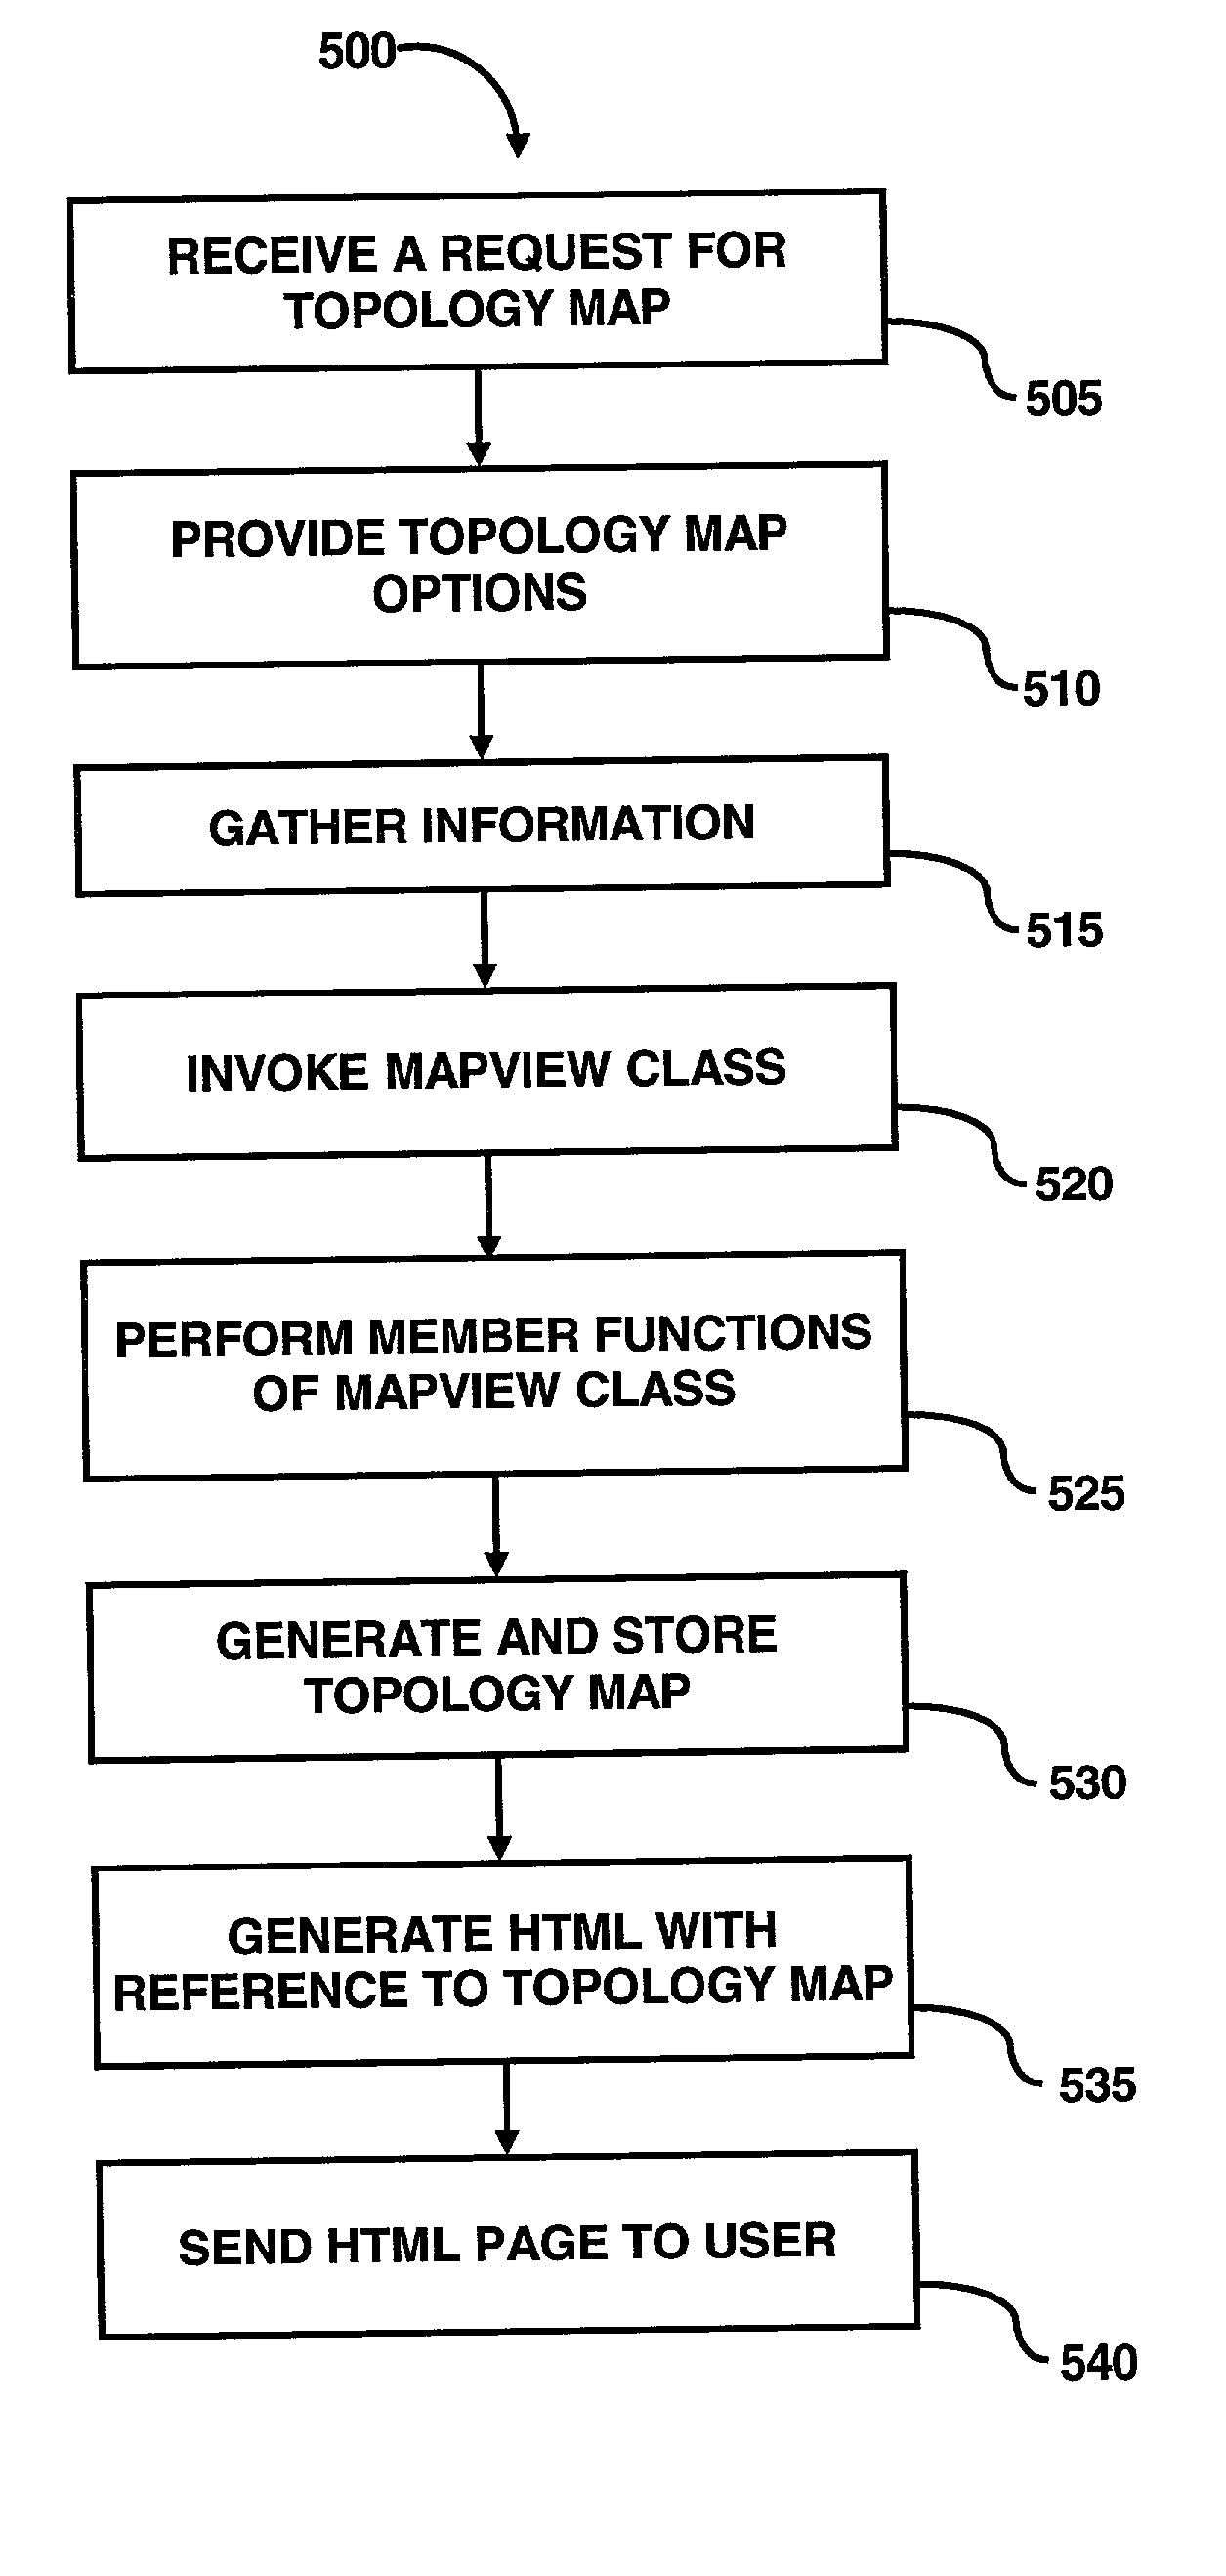 System for displaying topology map information through the web